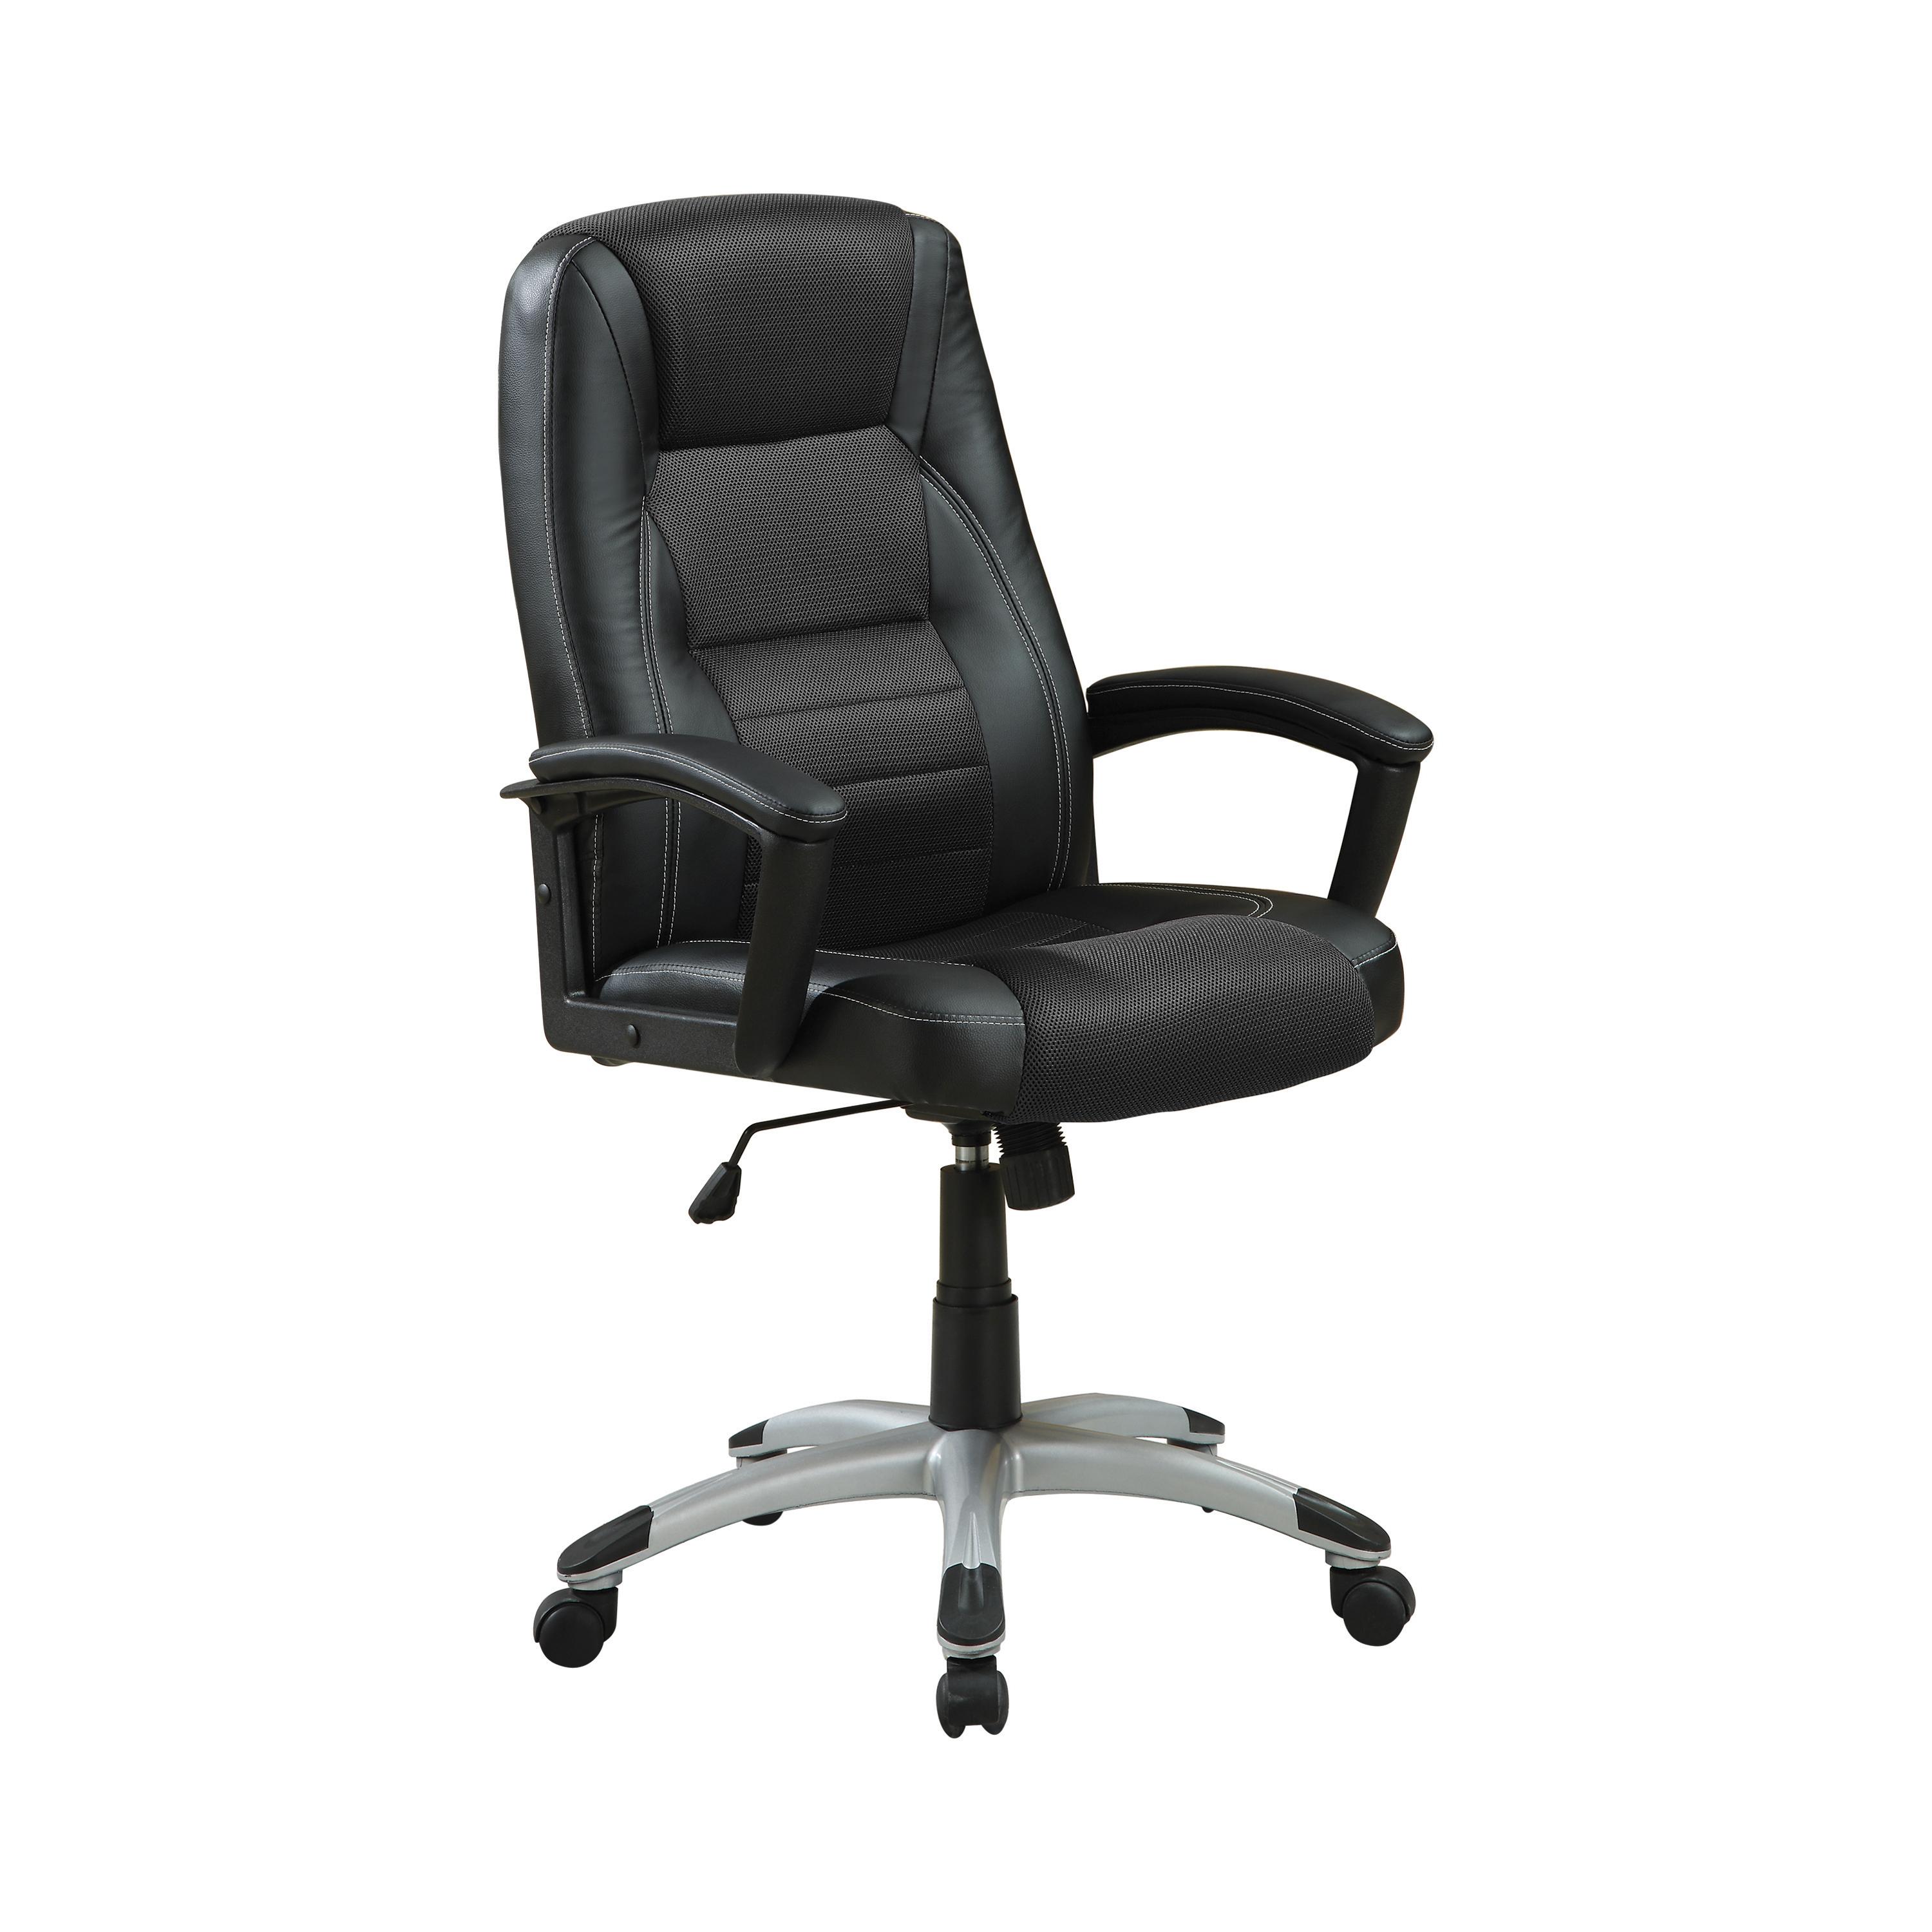 Modern Office Chair 800209 800209 in Black Leatherette